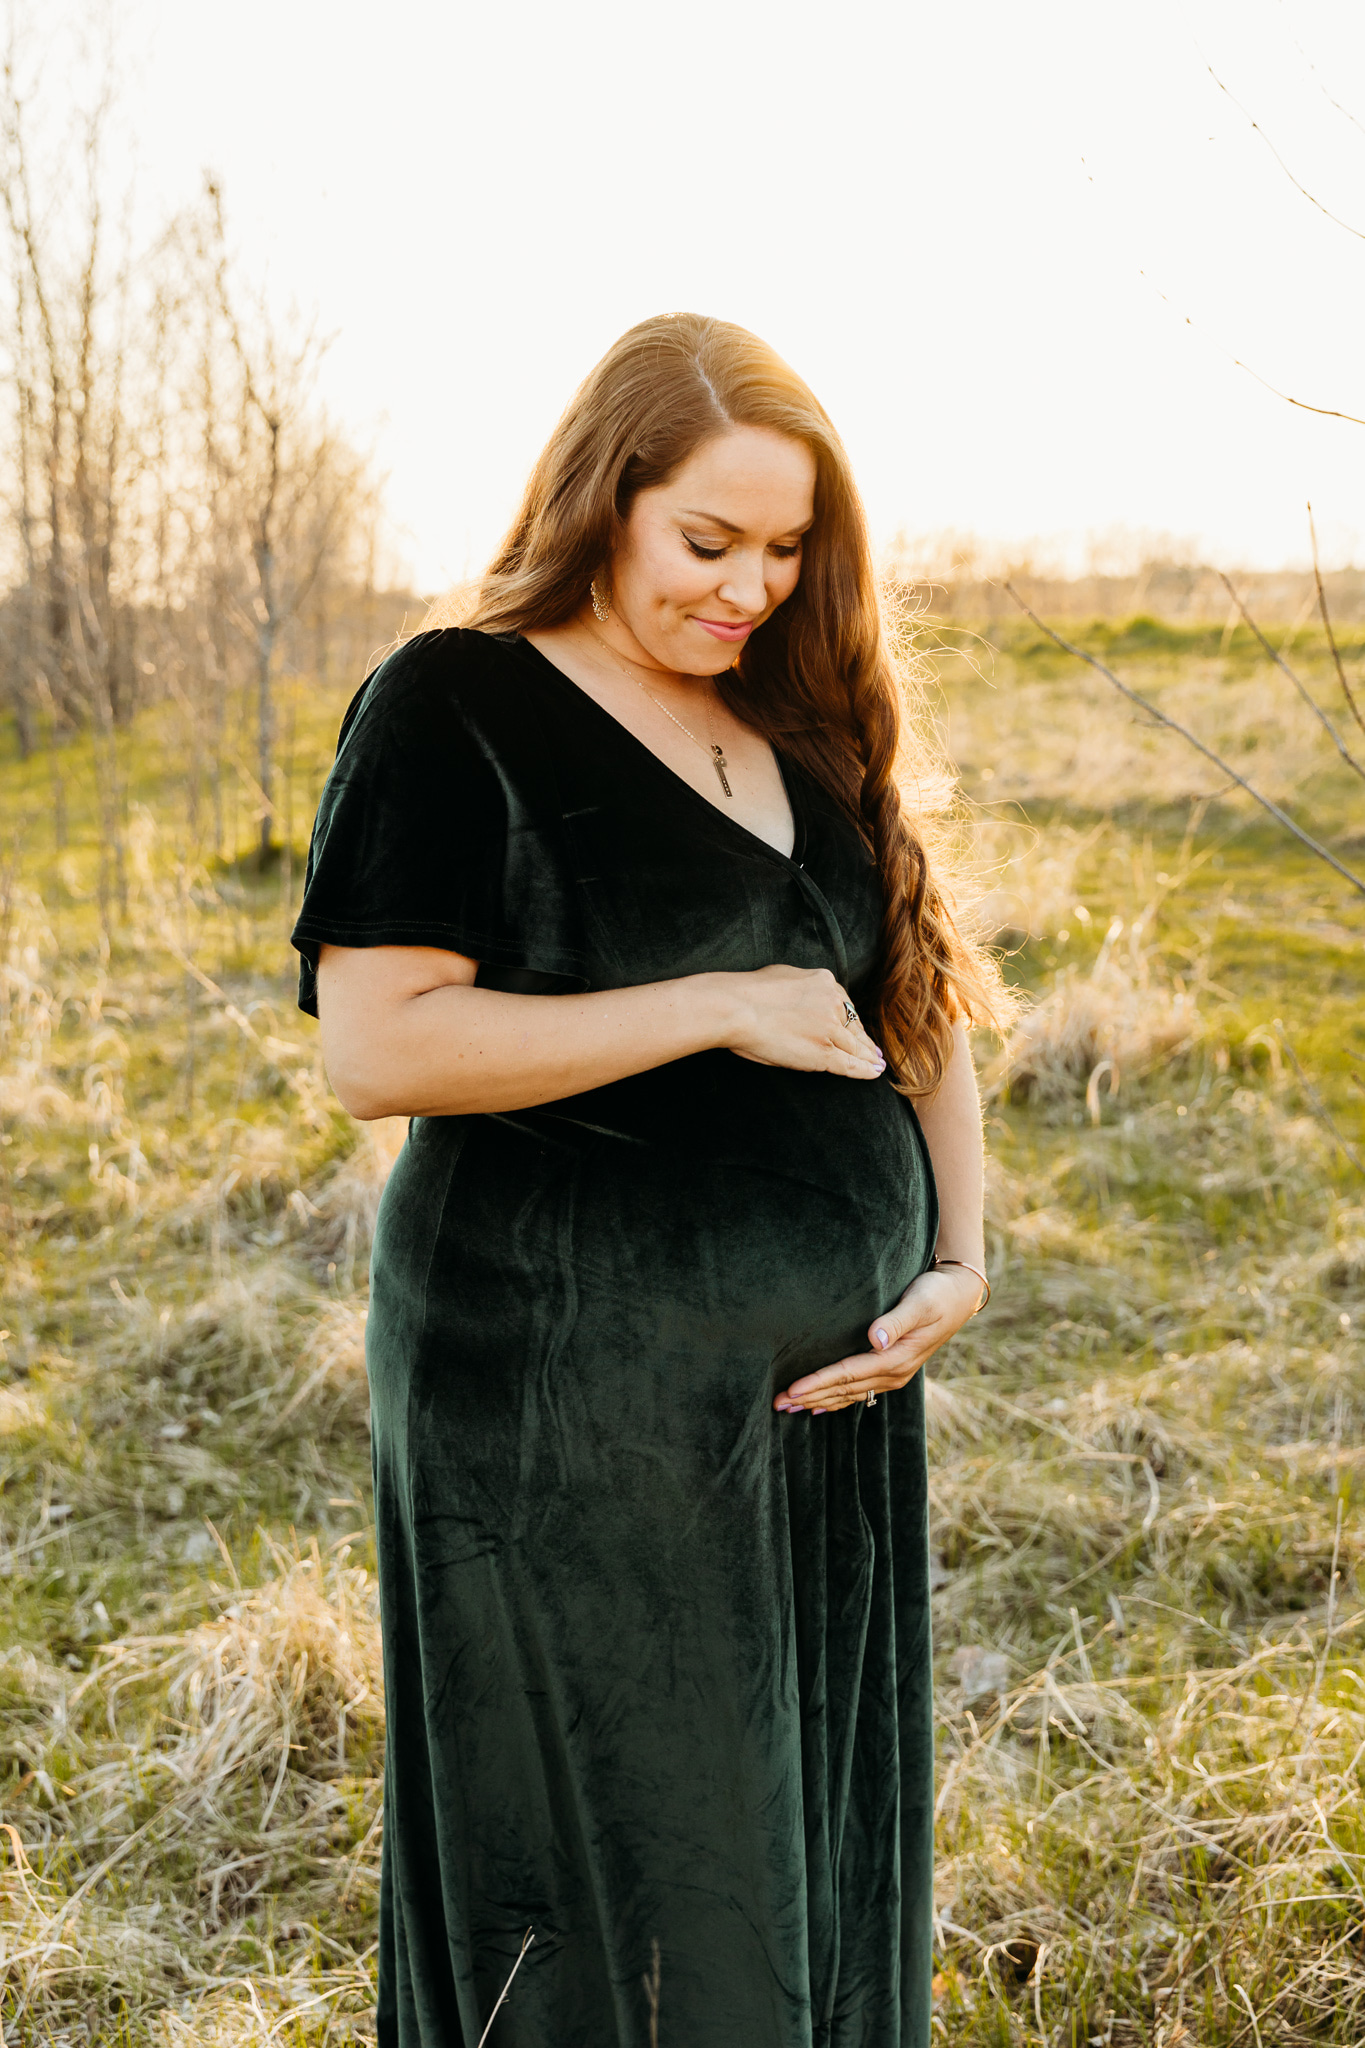 A mother to be stands in a field wearing a green maternity dress while looking down at the bump her hands are holding Milwaukee yoga studios